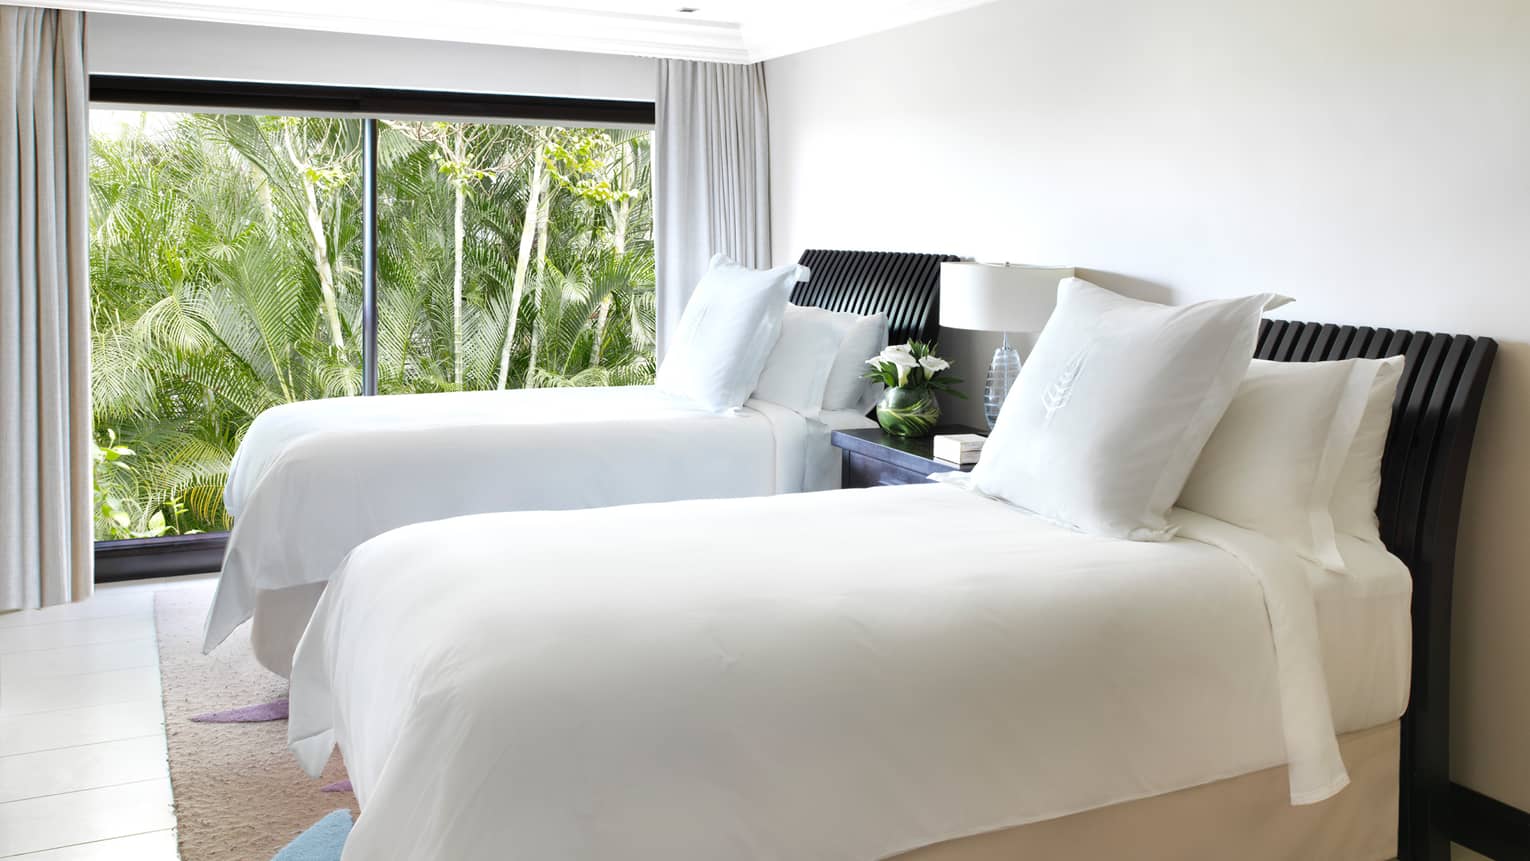 Two single beds with white linens, pillows in bright room by floor-to-ceiling window